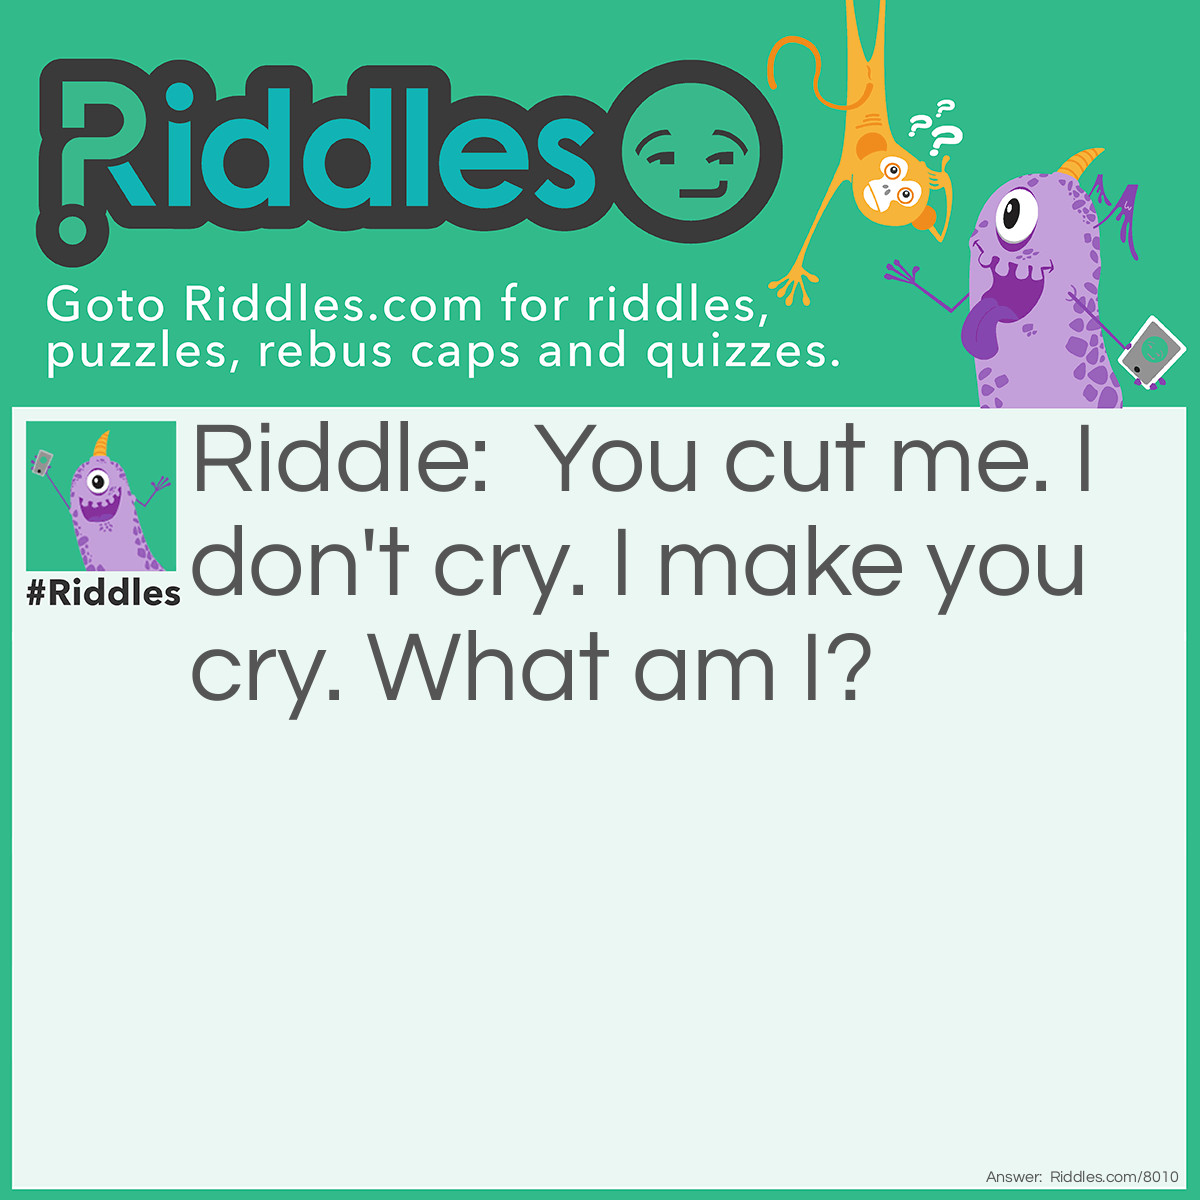 Riddle: You cut me. I don't cry. I make you cry. What am I? Answer: An onion